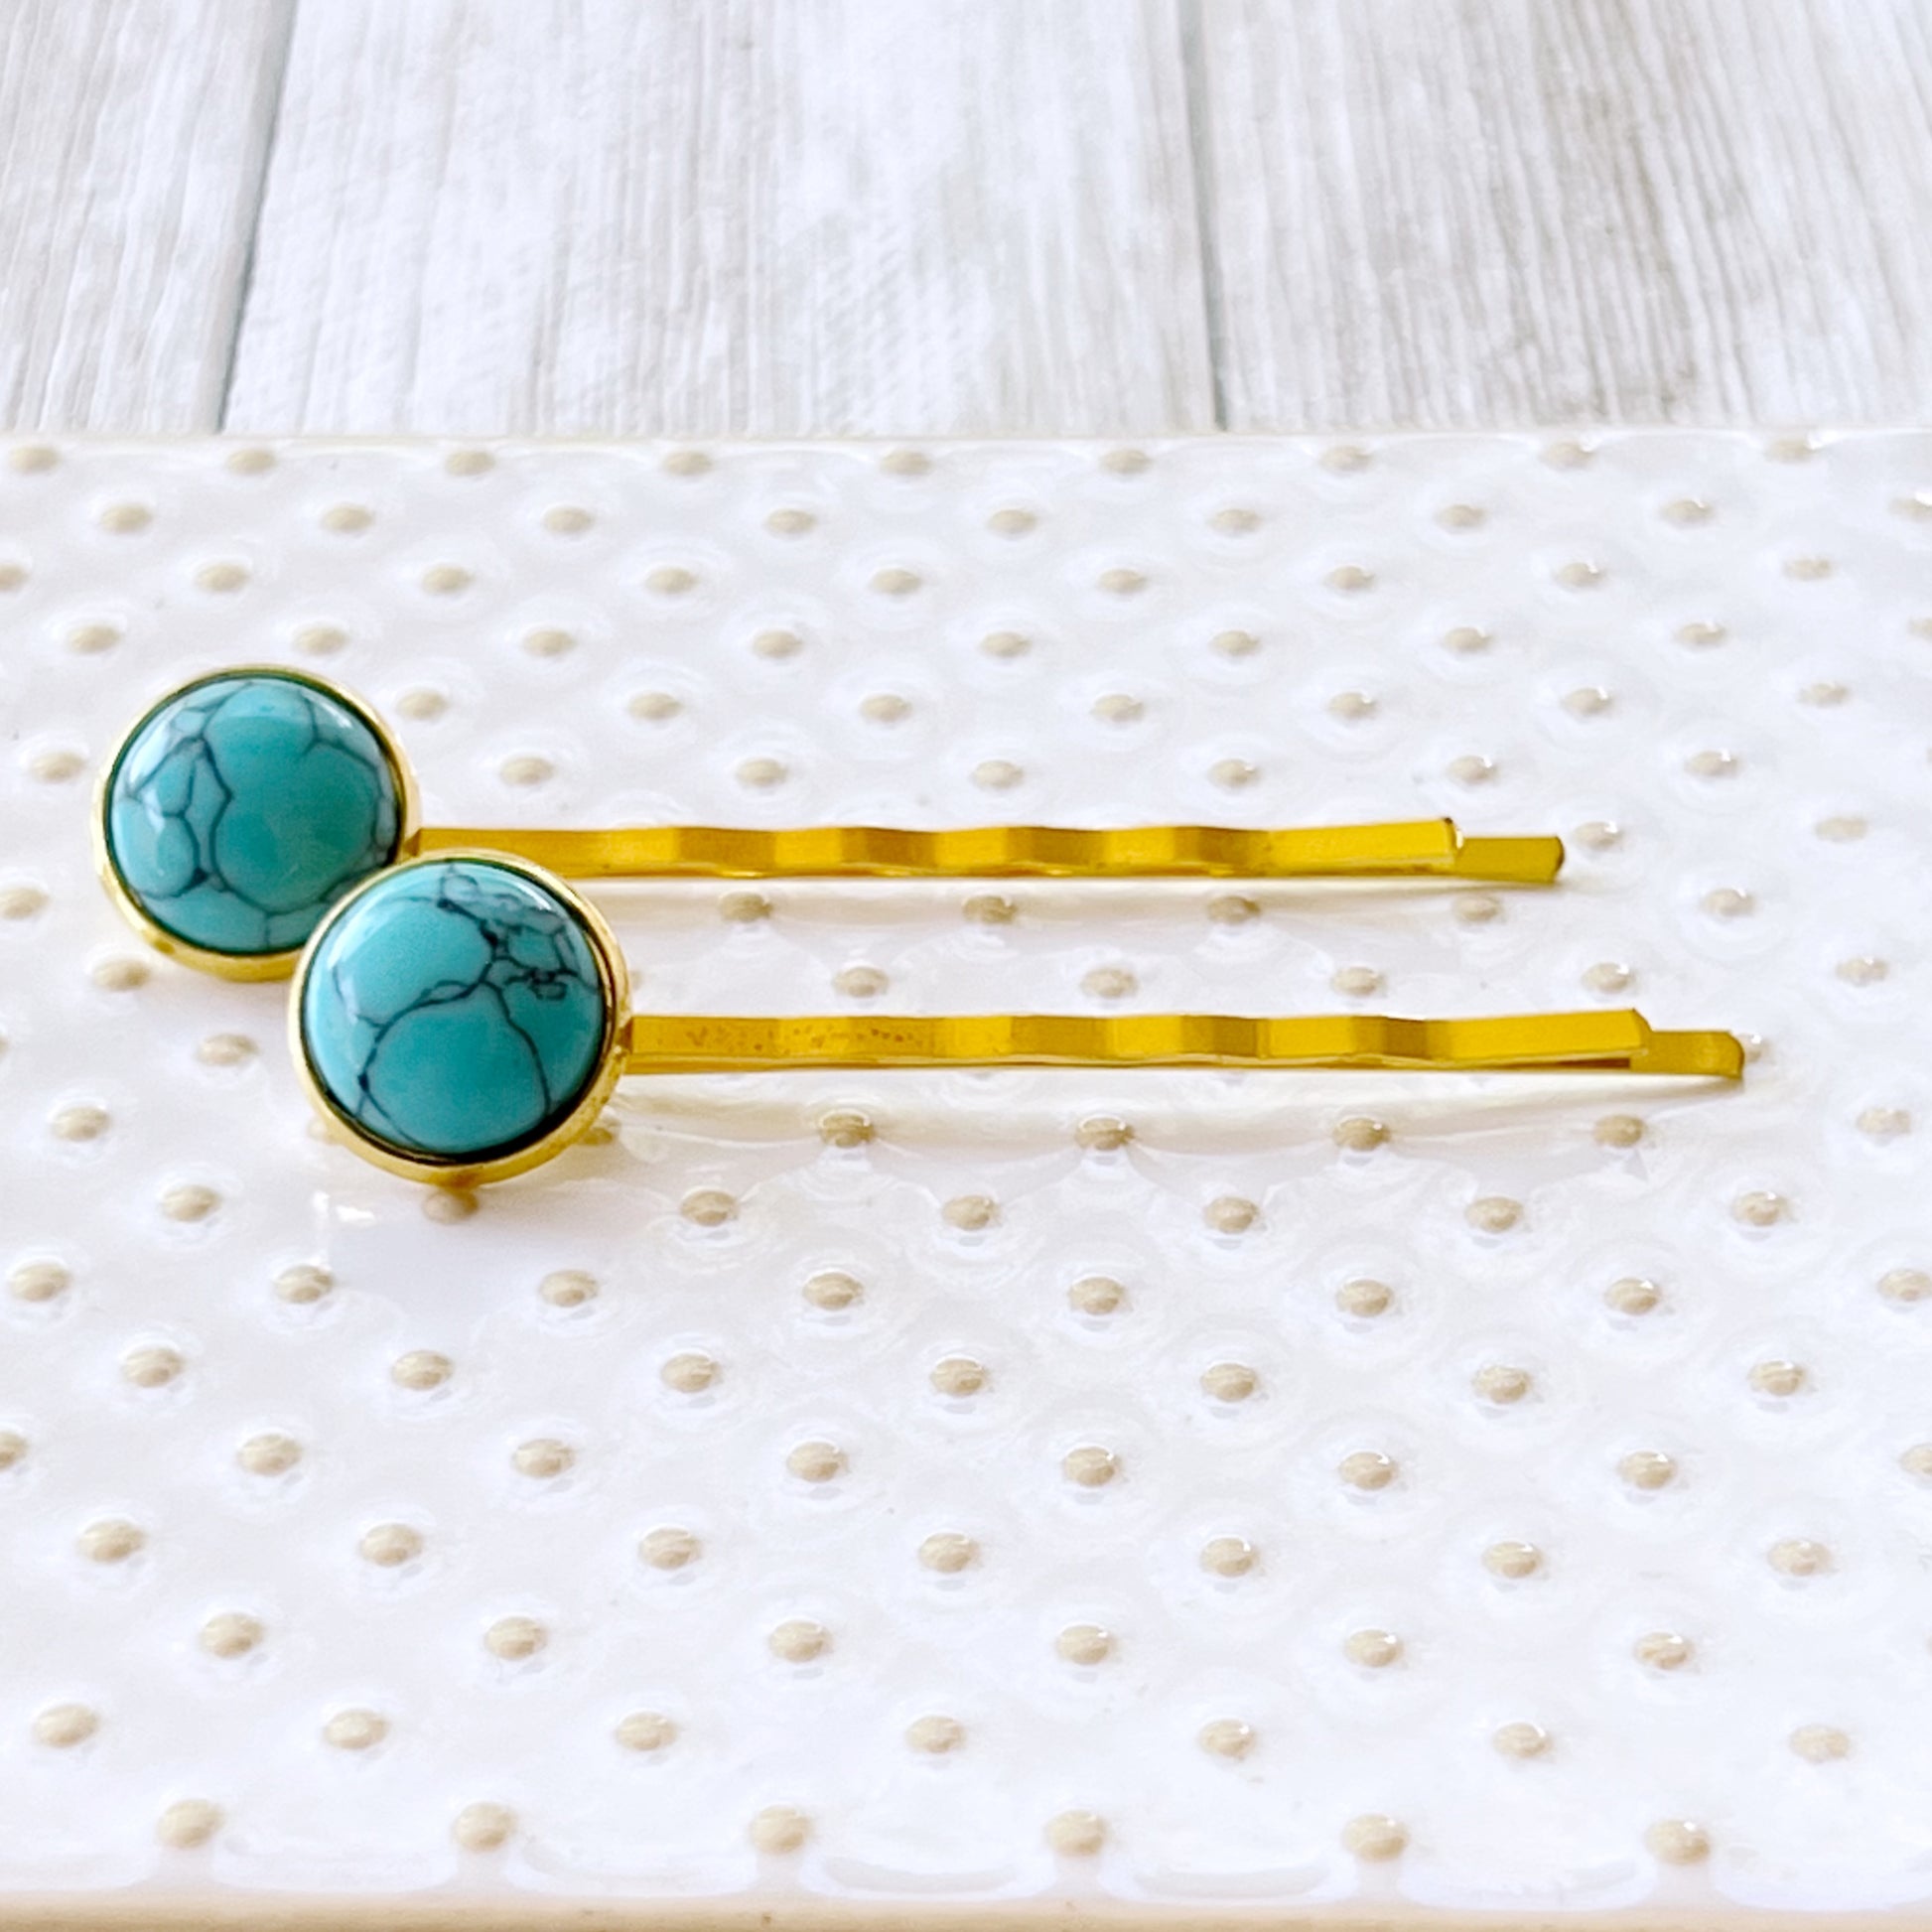 Turquoise Hair Pins - Western Cowgirl Decorative Gold Bobby Pin, Women's Southwestern Hair Accessories